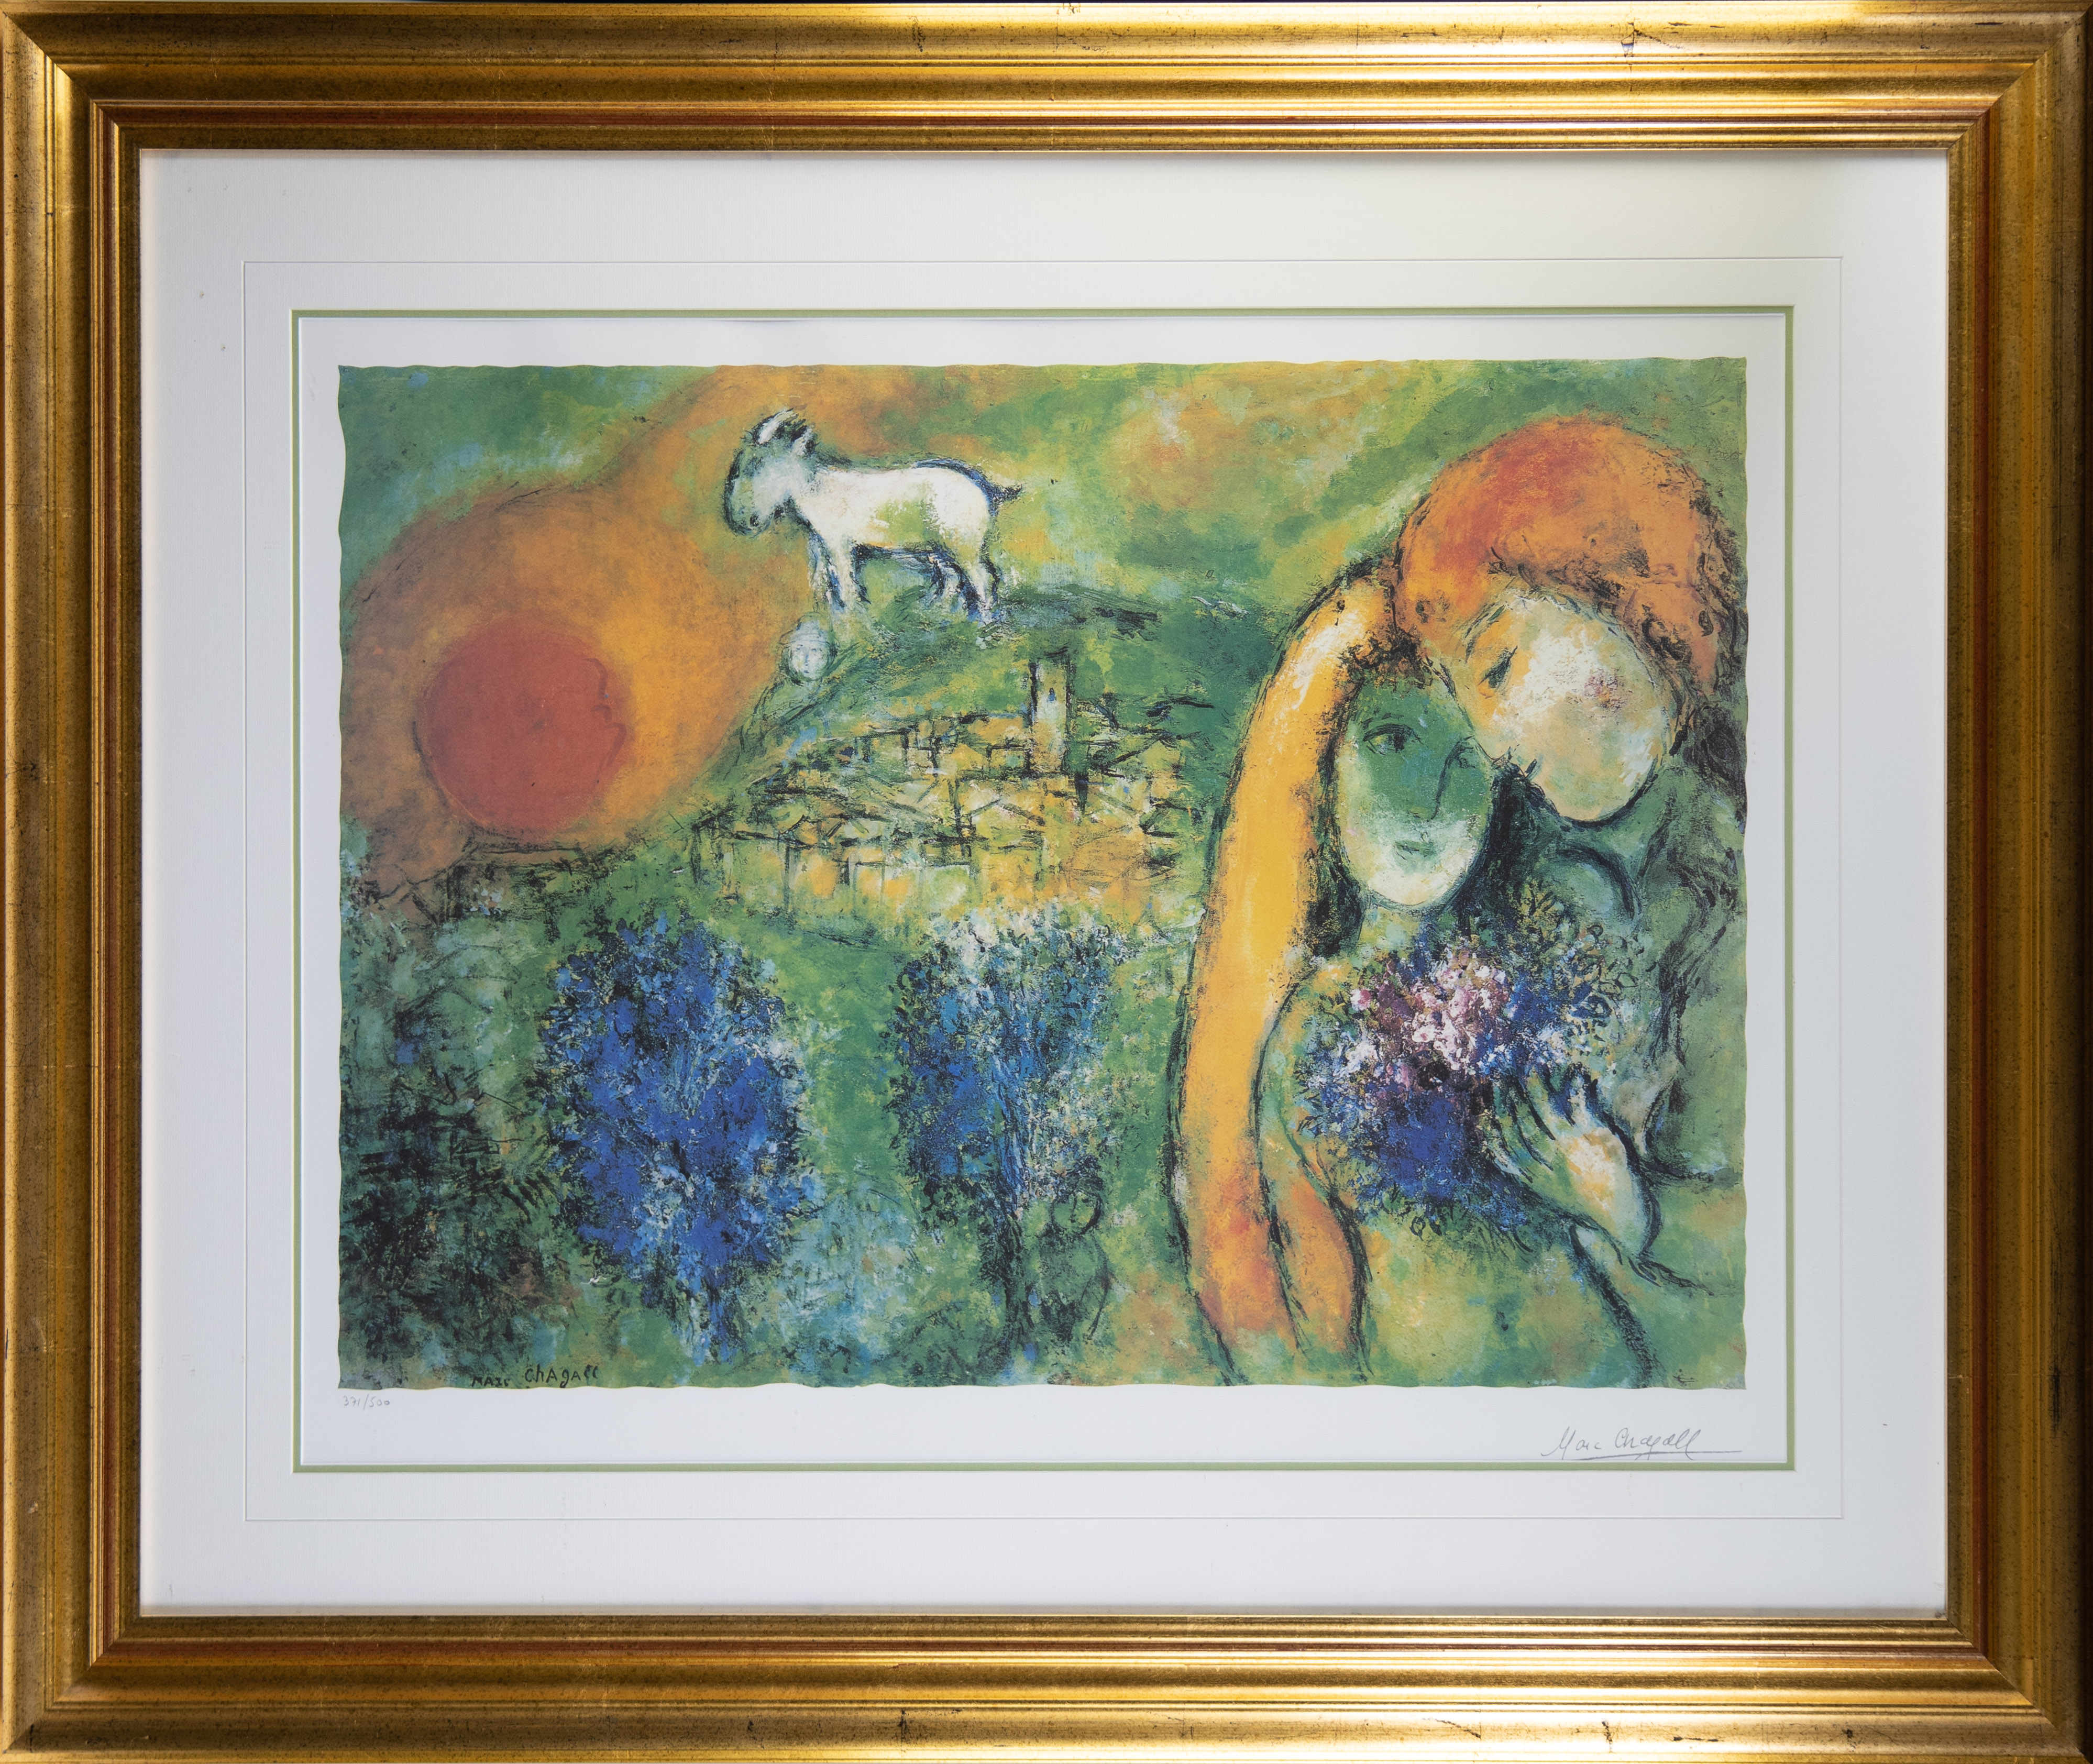 Print/Lithograph LES AMOUREUX DE VENCE by Marc CHAGALL, numbered 371/500 and signed in the plate. - Image 2 of 4